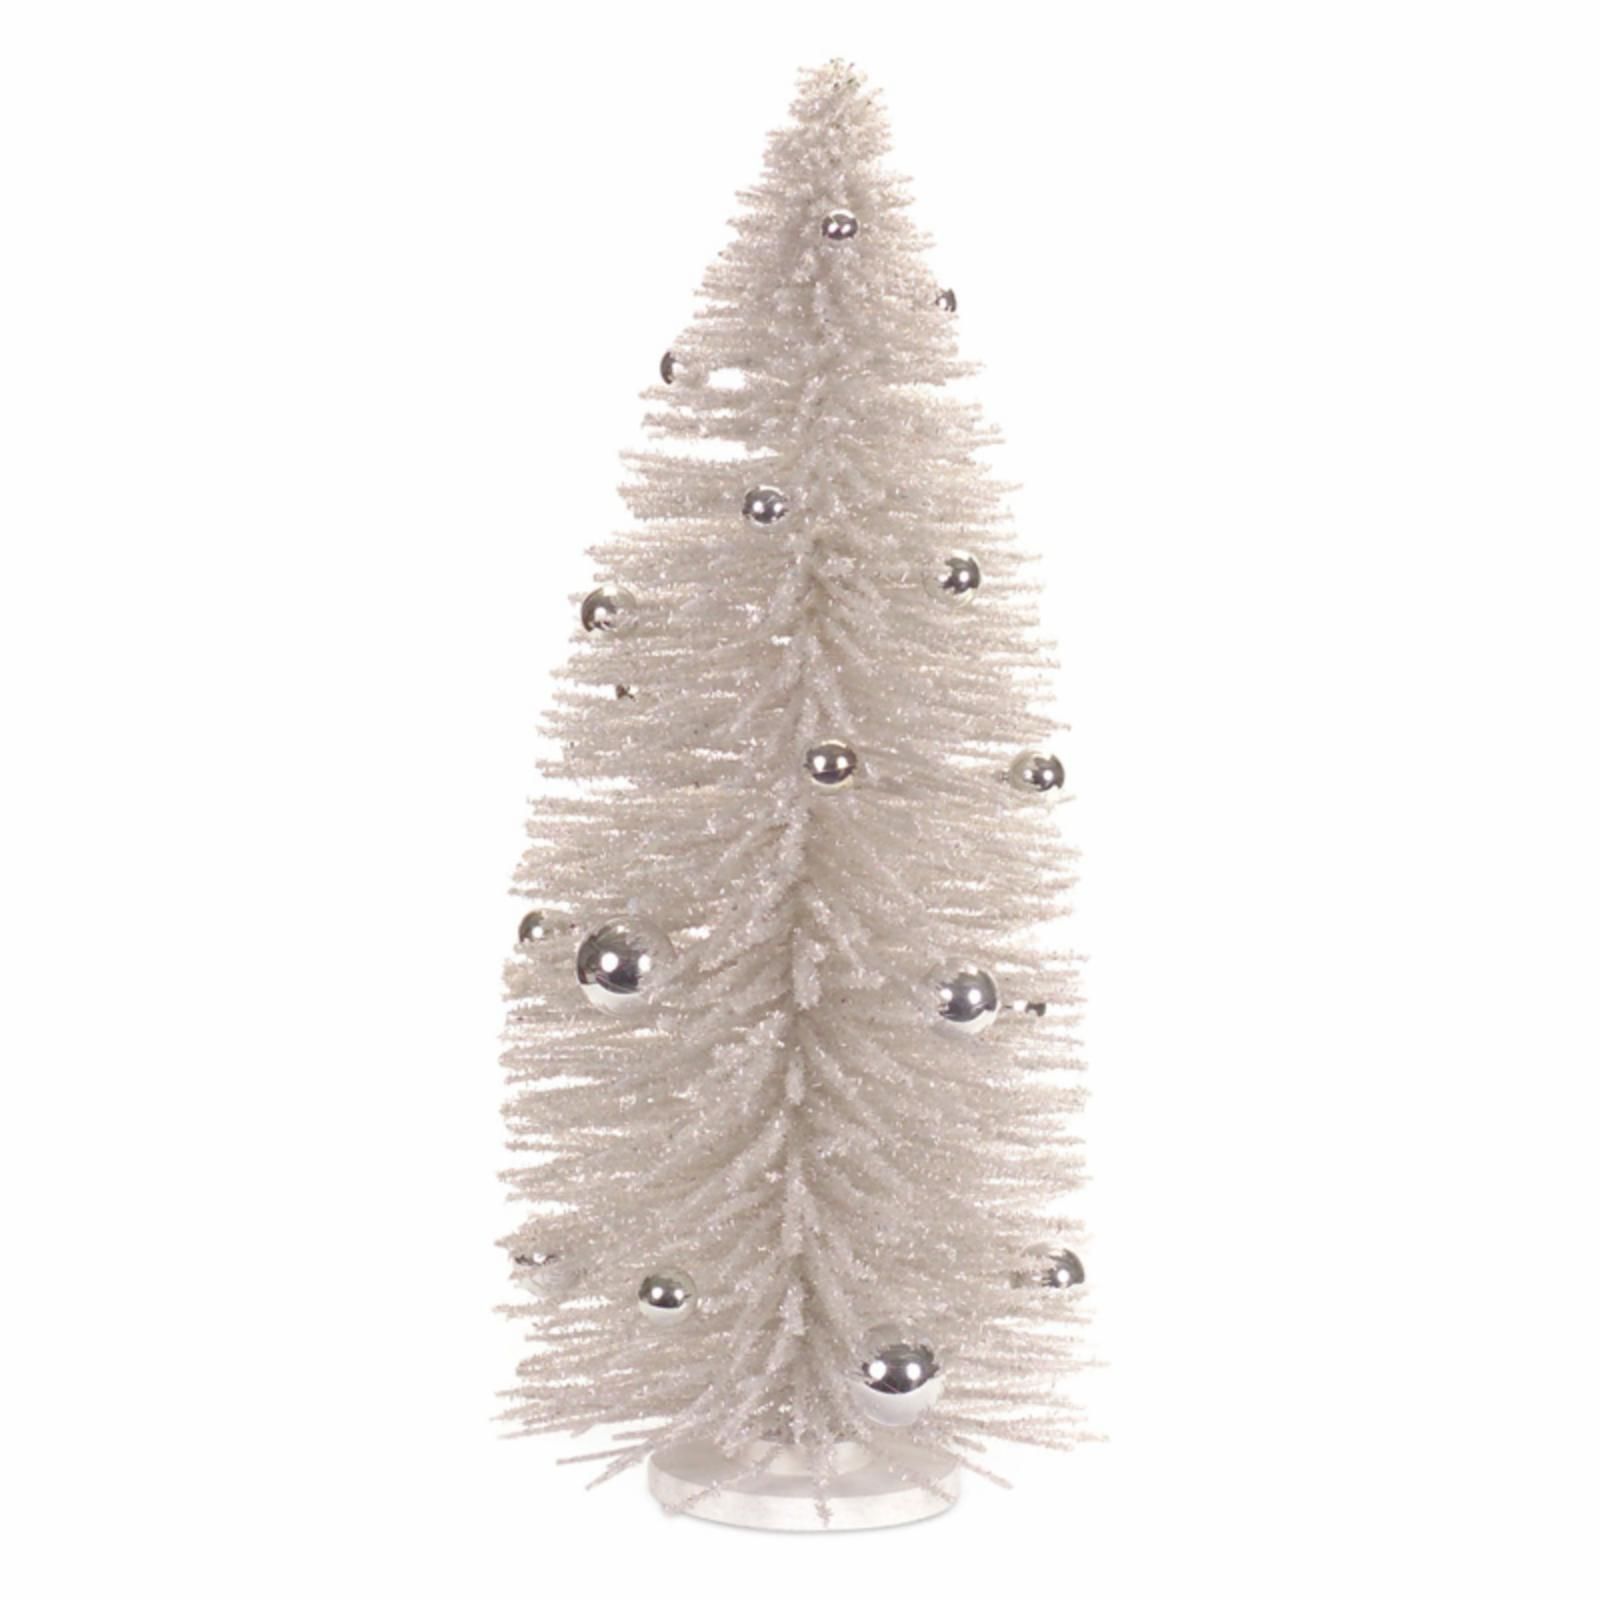 Melrose Silver Bottle Brush Tabletop Christmas Tree with Ornaments | Hayneedle